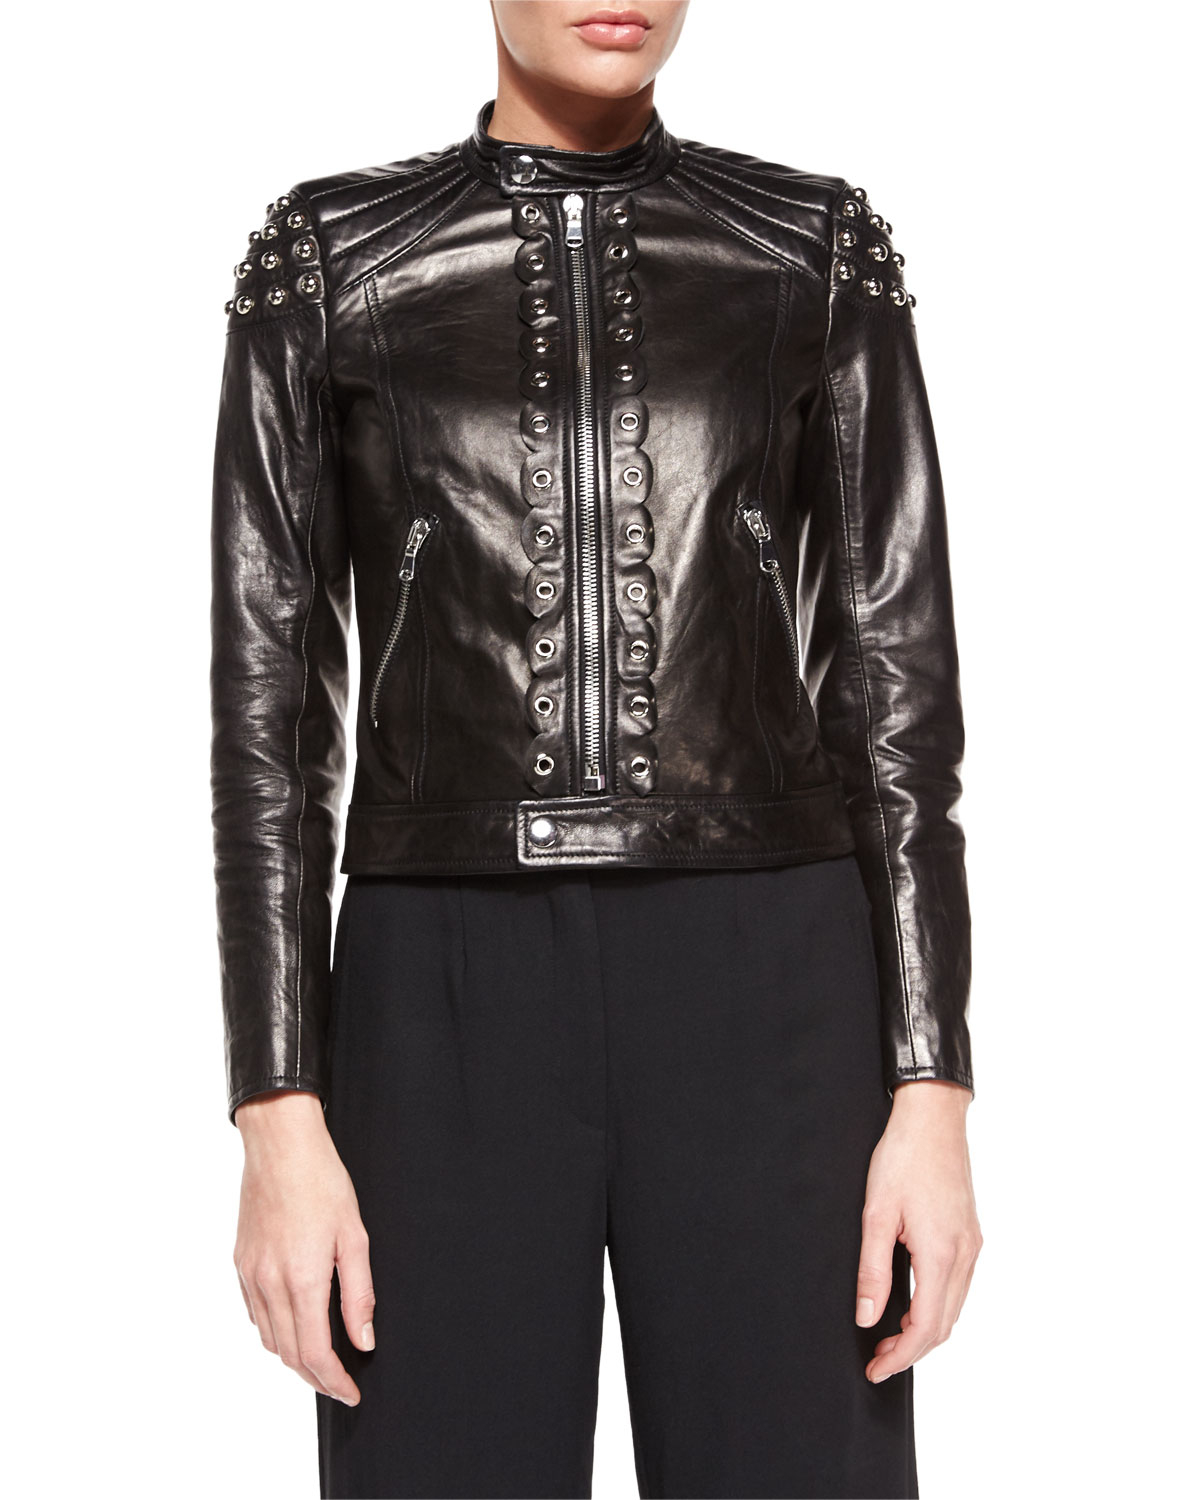 Red valentino Grommet Pieced Leather Jacket in Black | Lyst